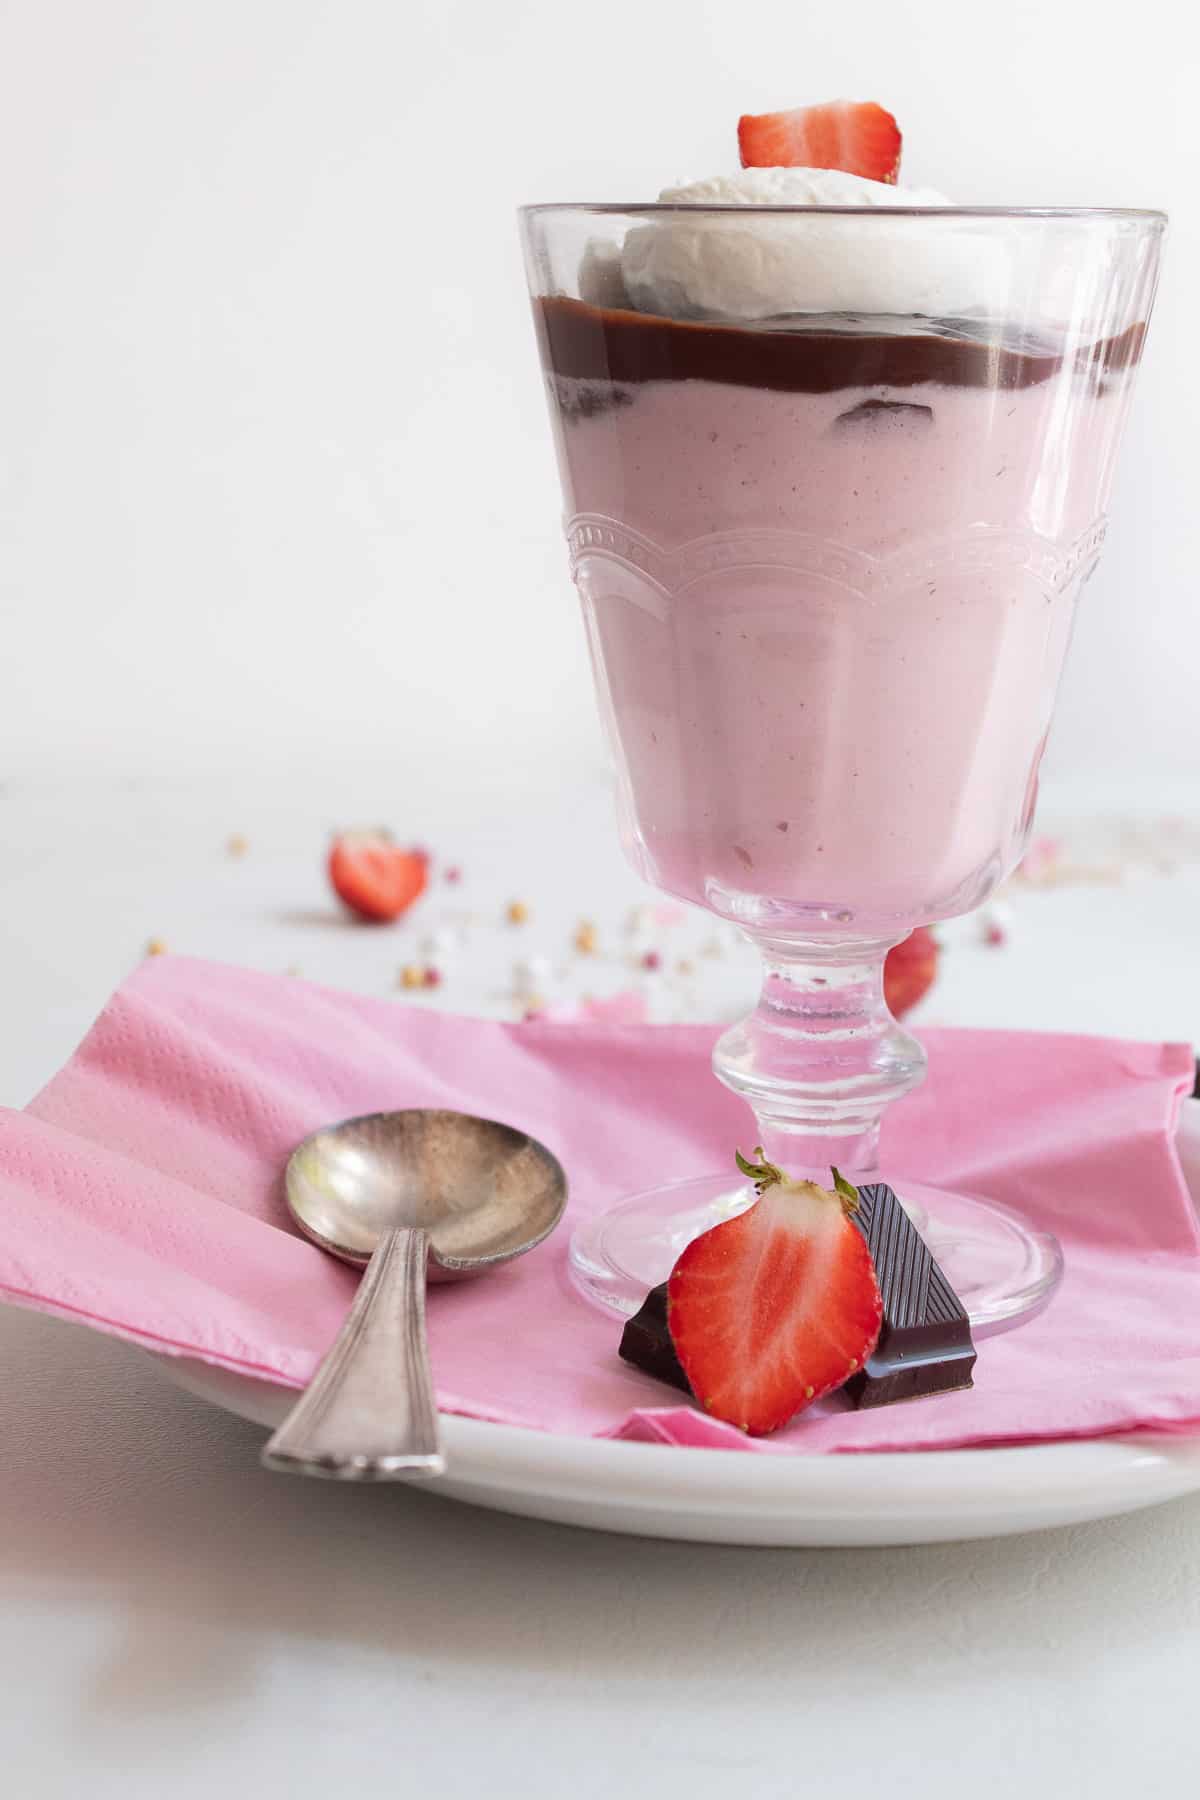 A footed serving glass is filled with a layer of pink mousse, a layer of dark chocolate, and a garnish of whipped cream and a sliced strawberry sits on a napkin-lined plate. A sliced strawberry and pieces of chocolate are in the foreground.